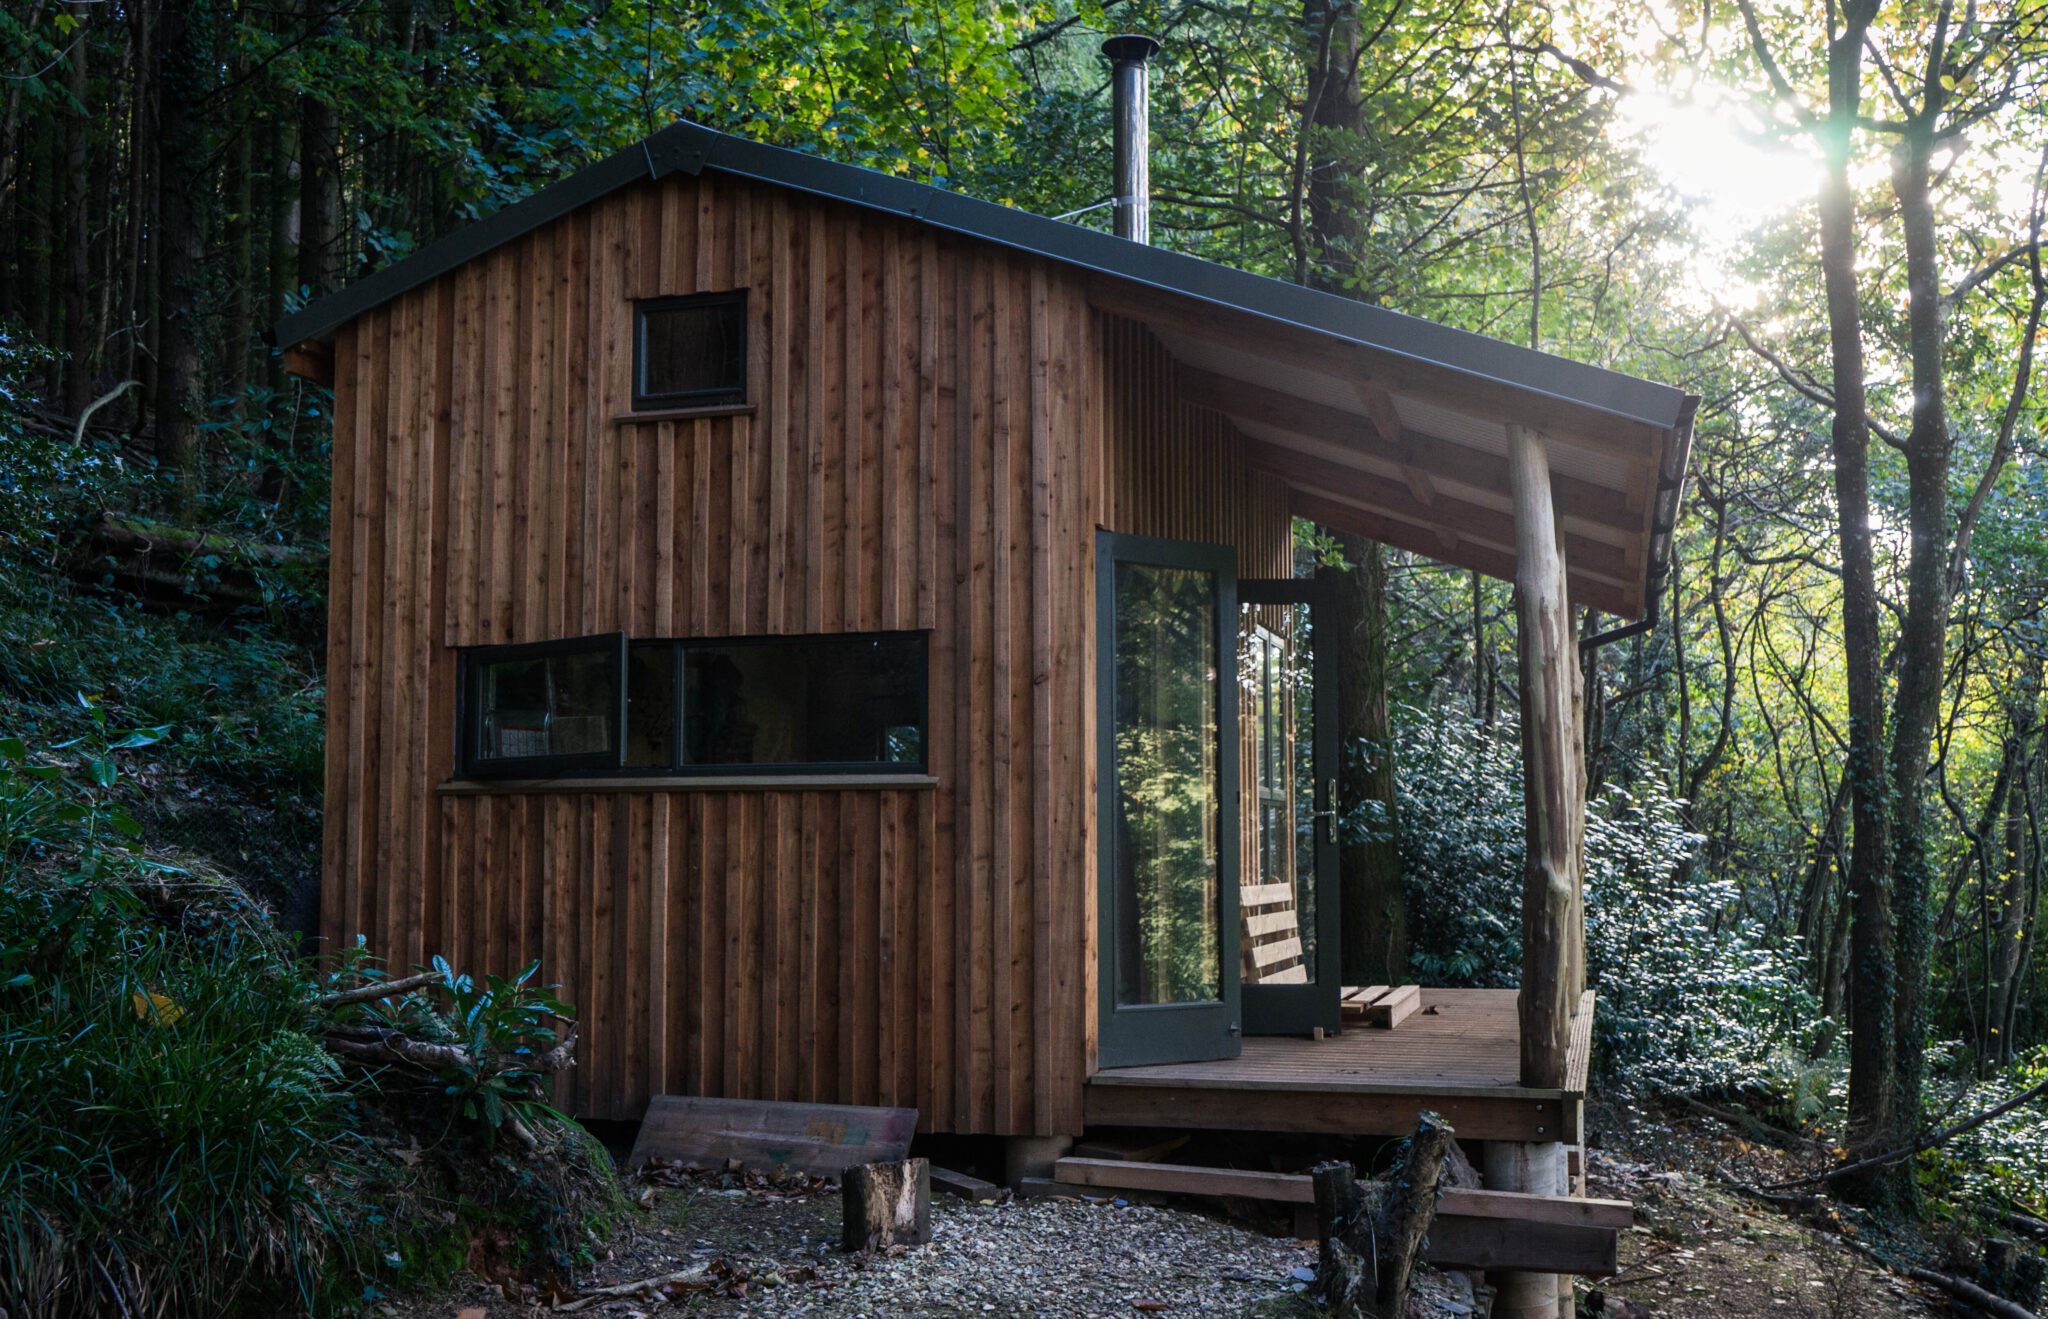 We-bought-a-piece-of-woodland-and-built-a-cabin-scaled-aspect-ratio-776-500